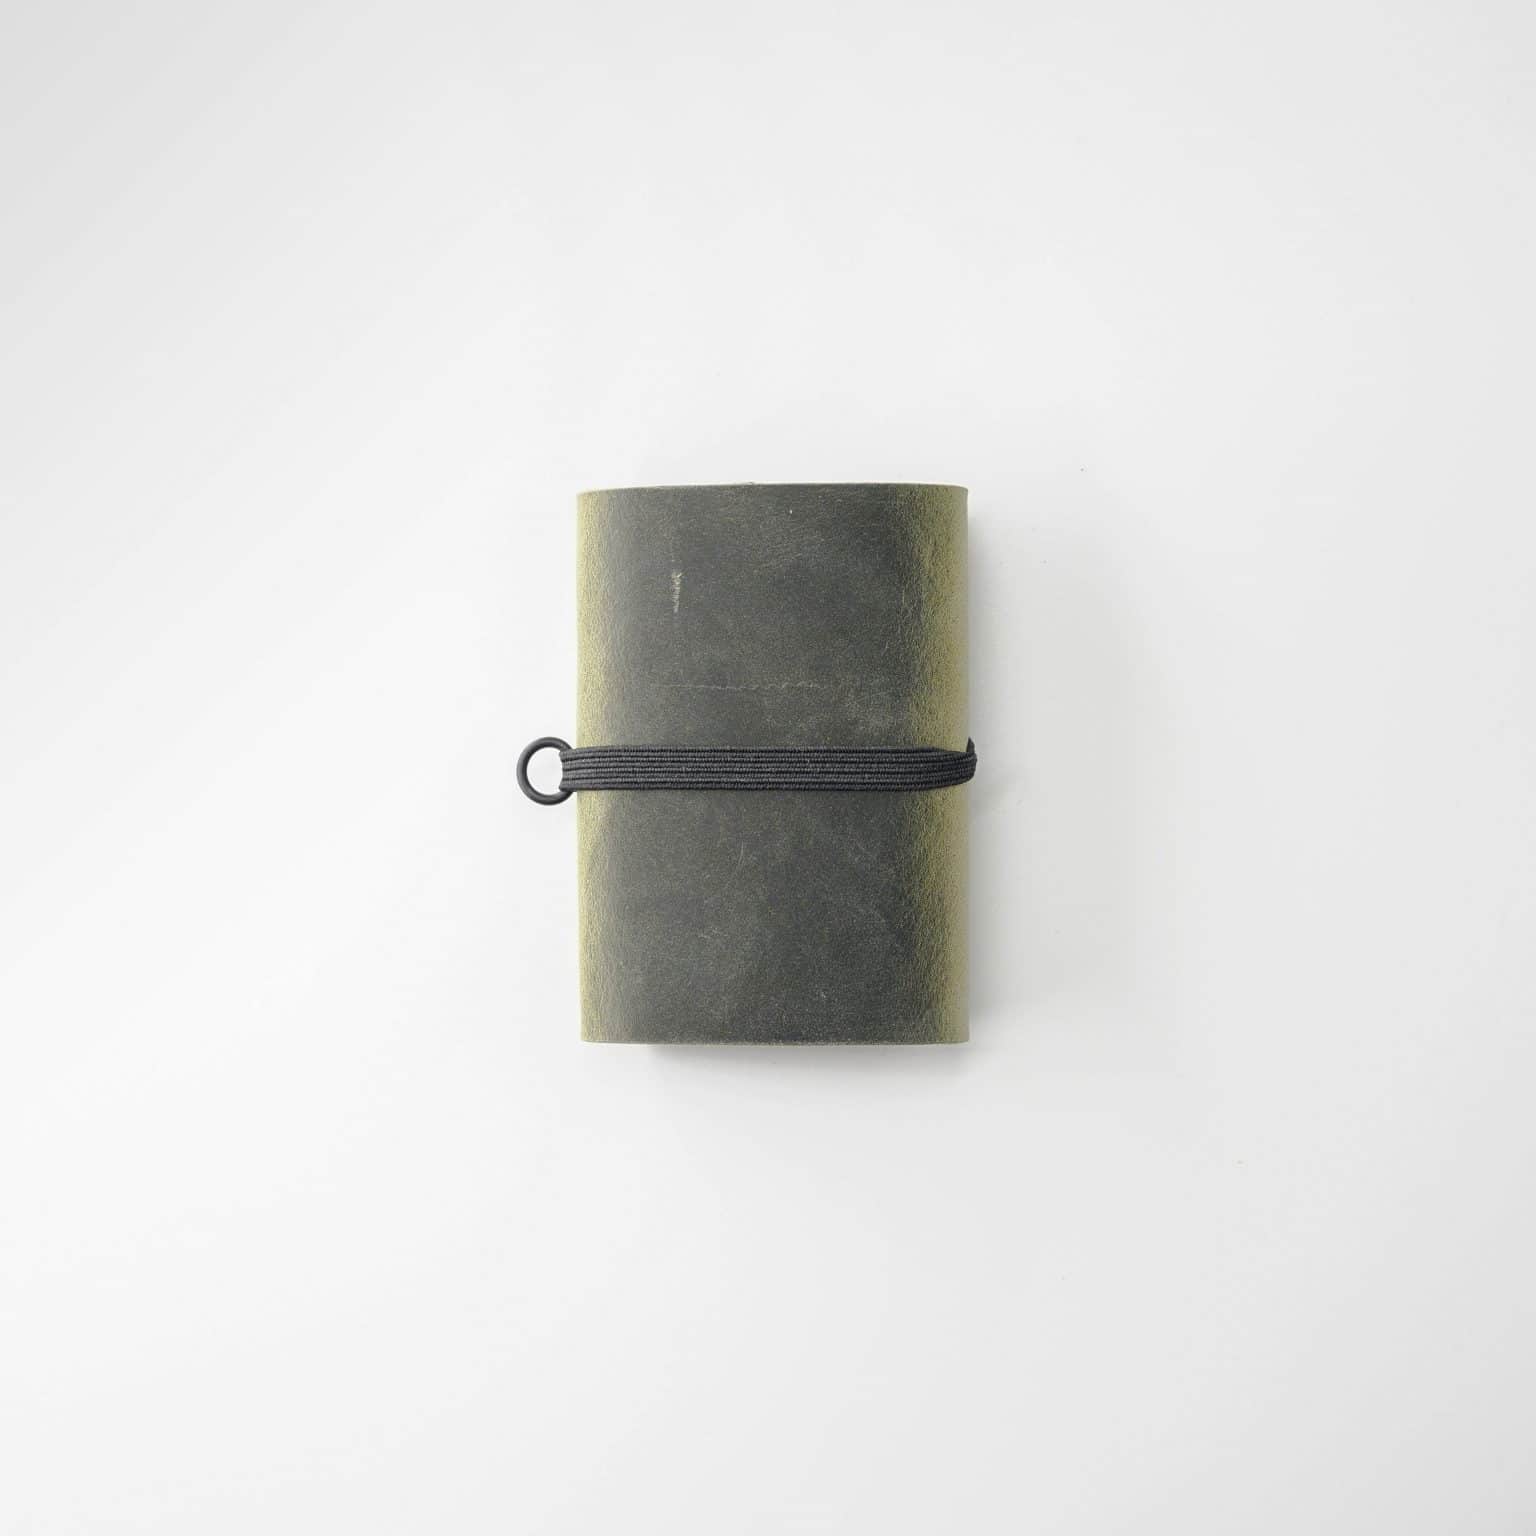 High-quality minimalist wallet with secure card storage.